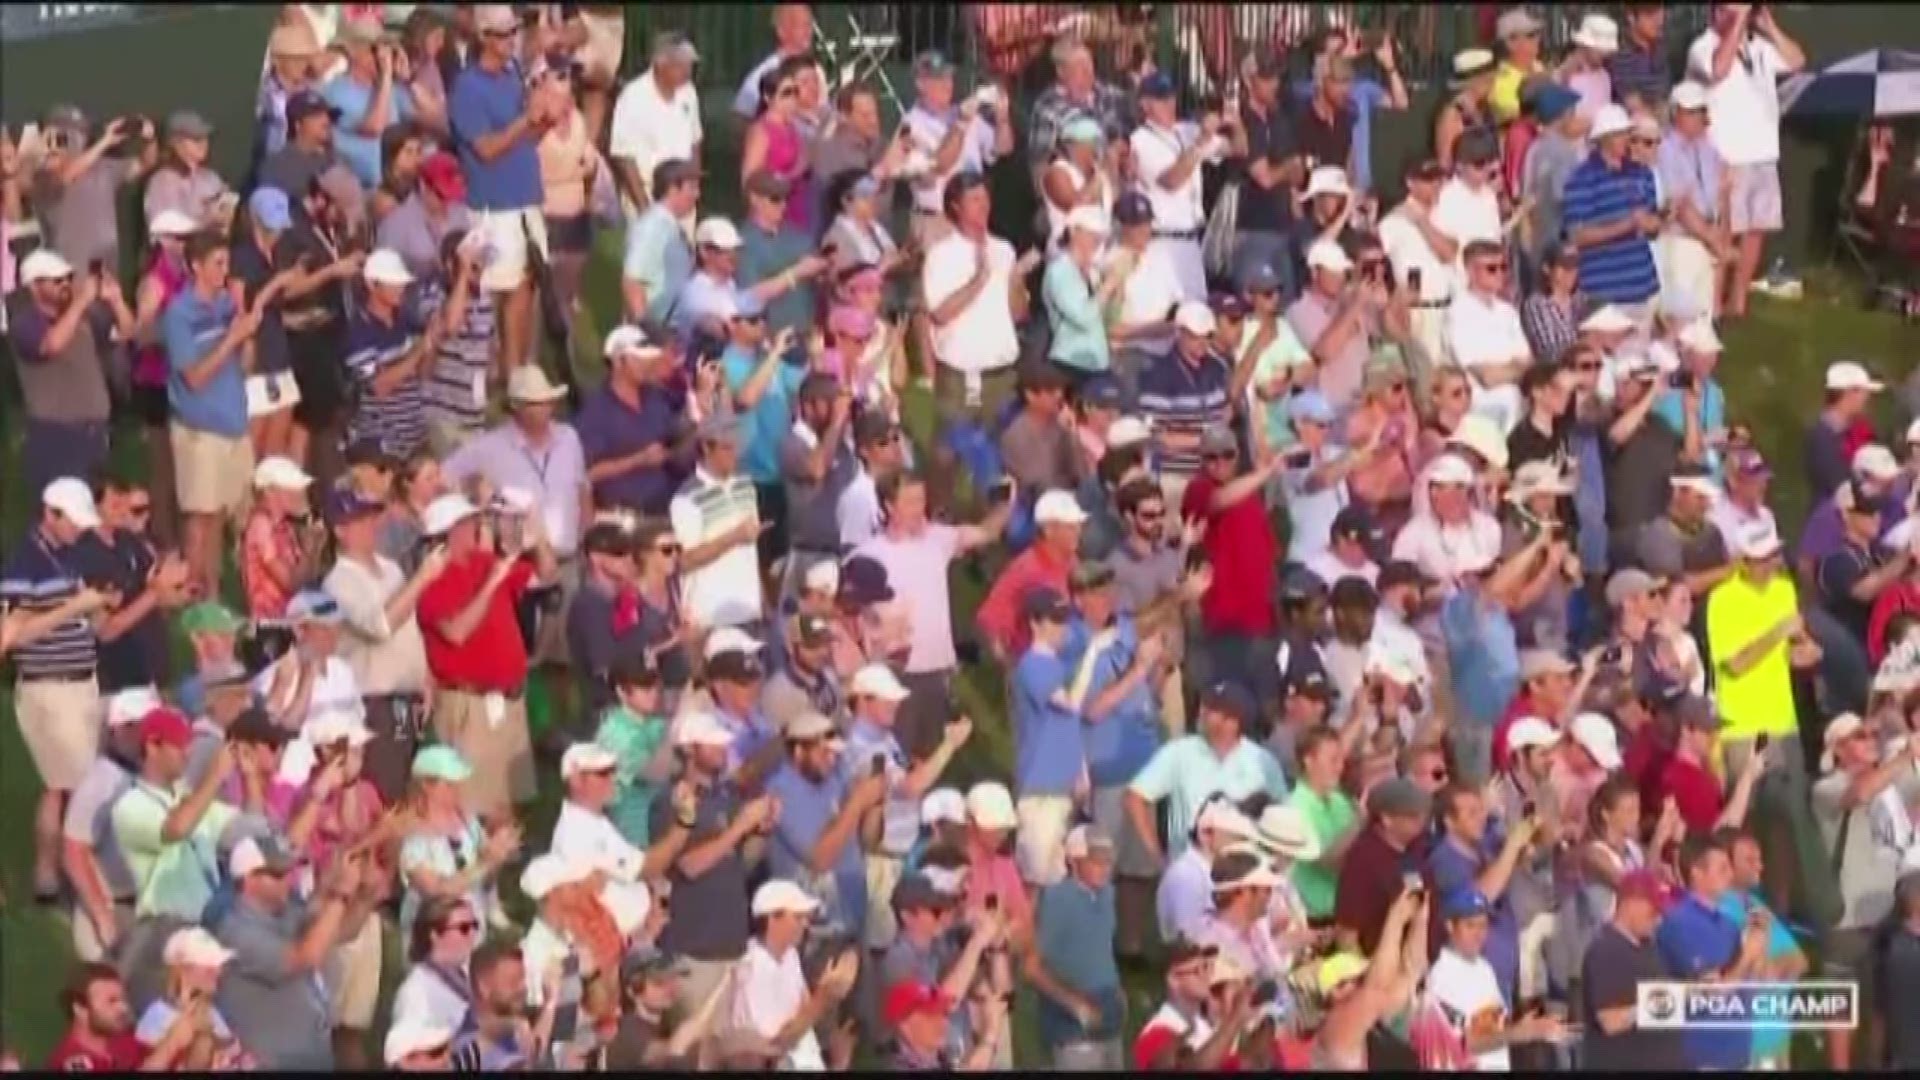 Estimates say over 200,000 people attended the PGA Championship